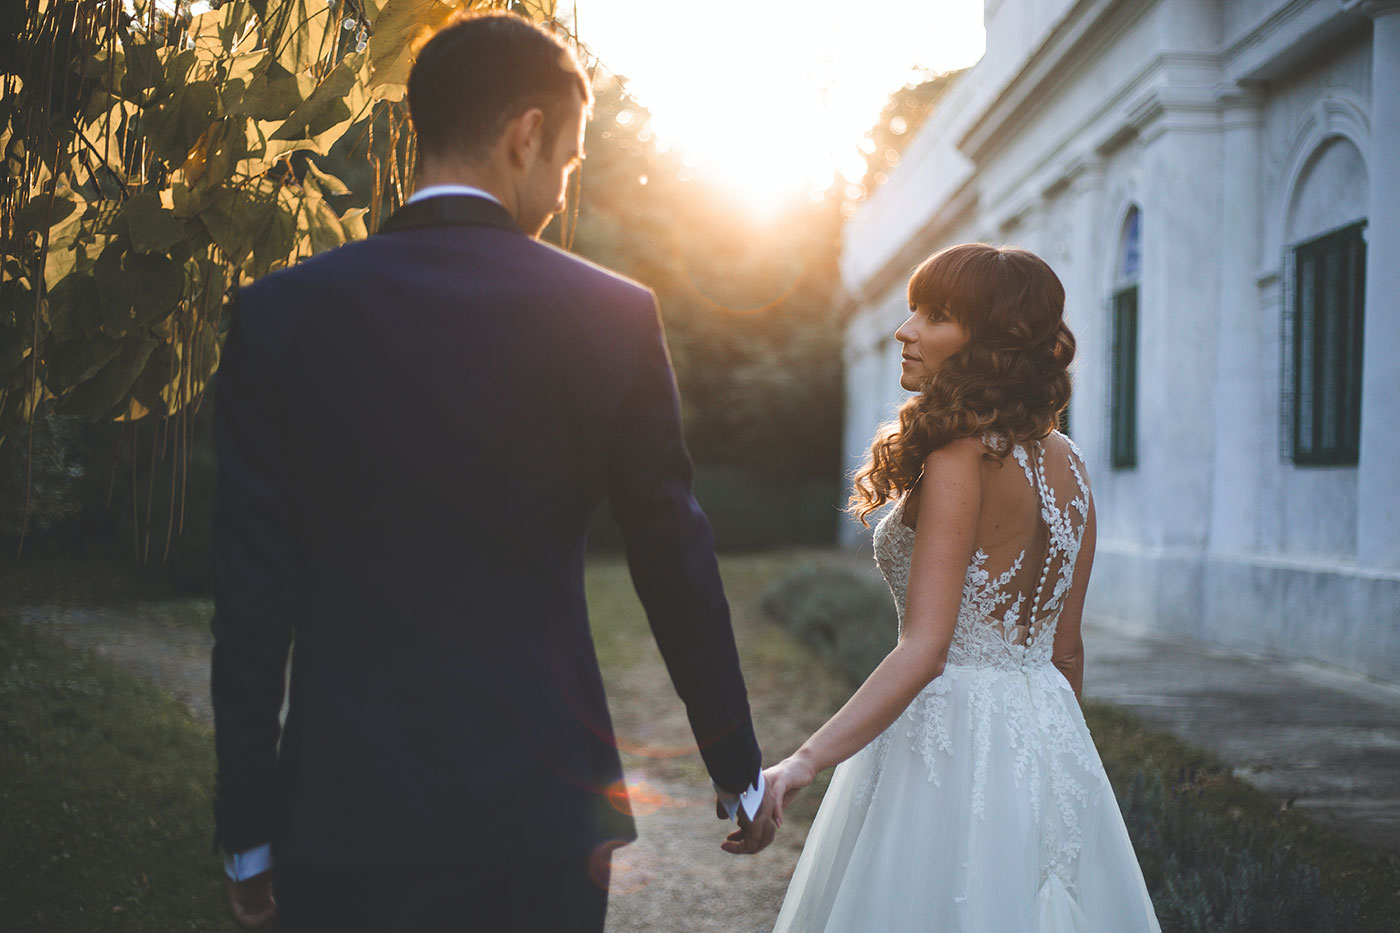 The Complete Guide to Planning a Wedding